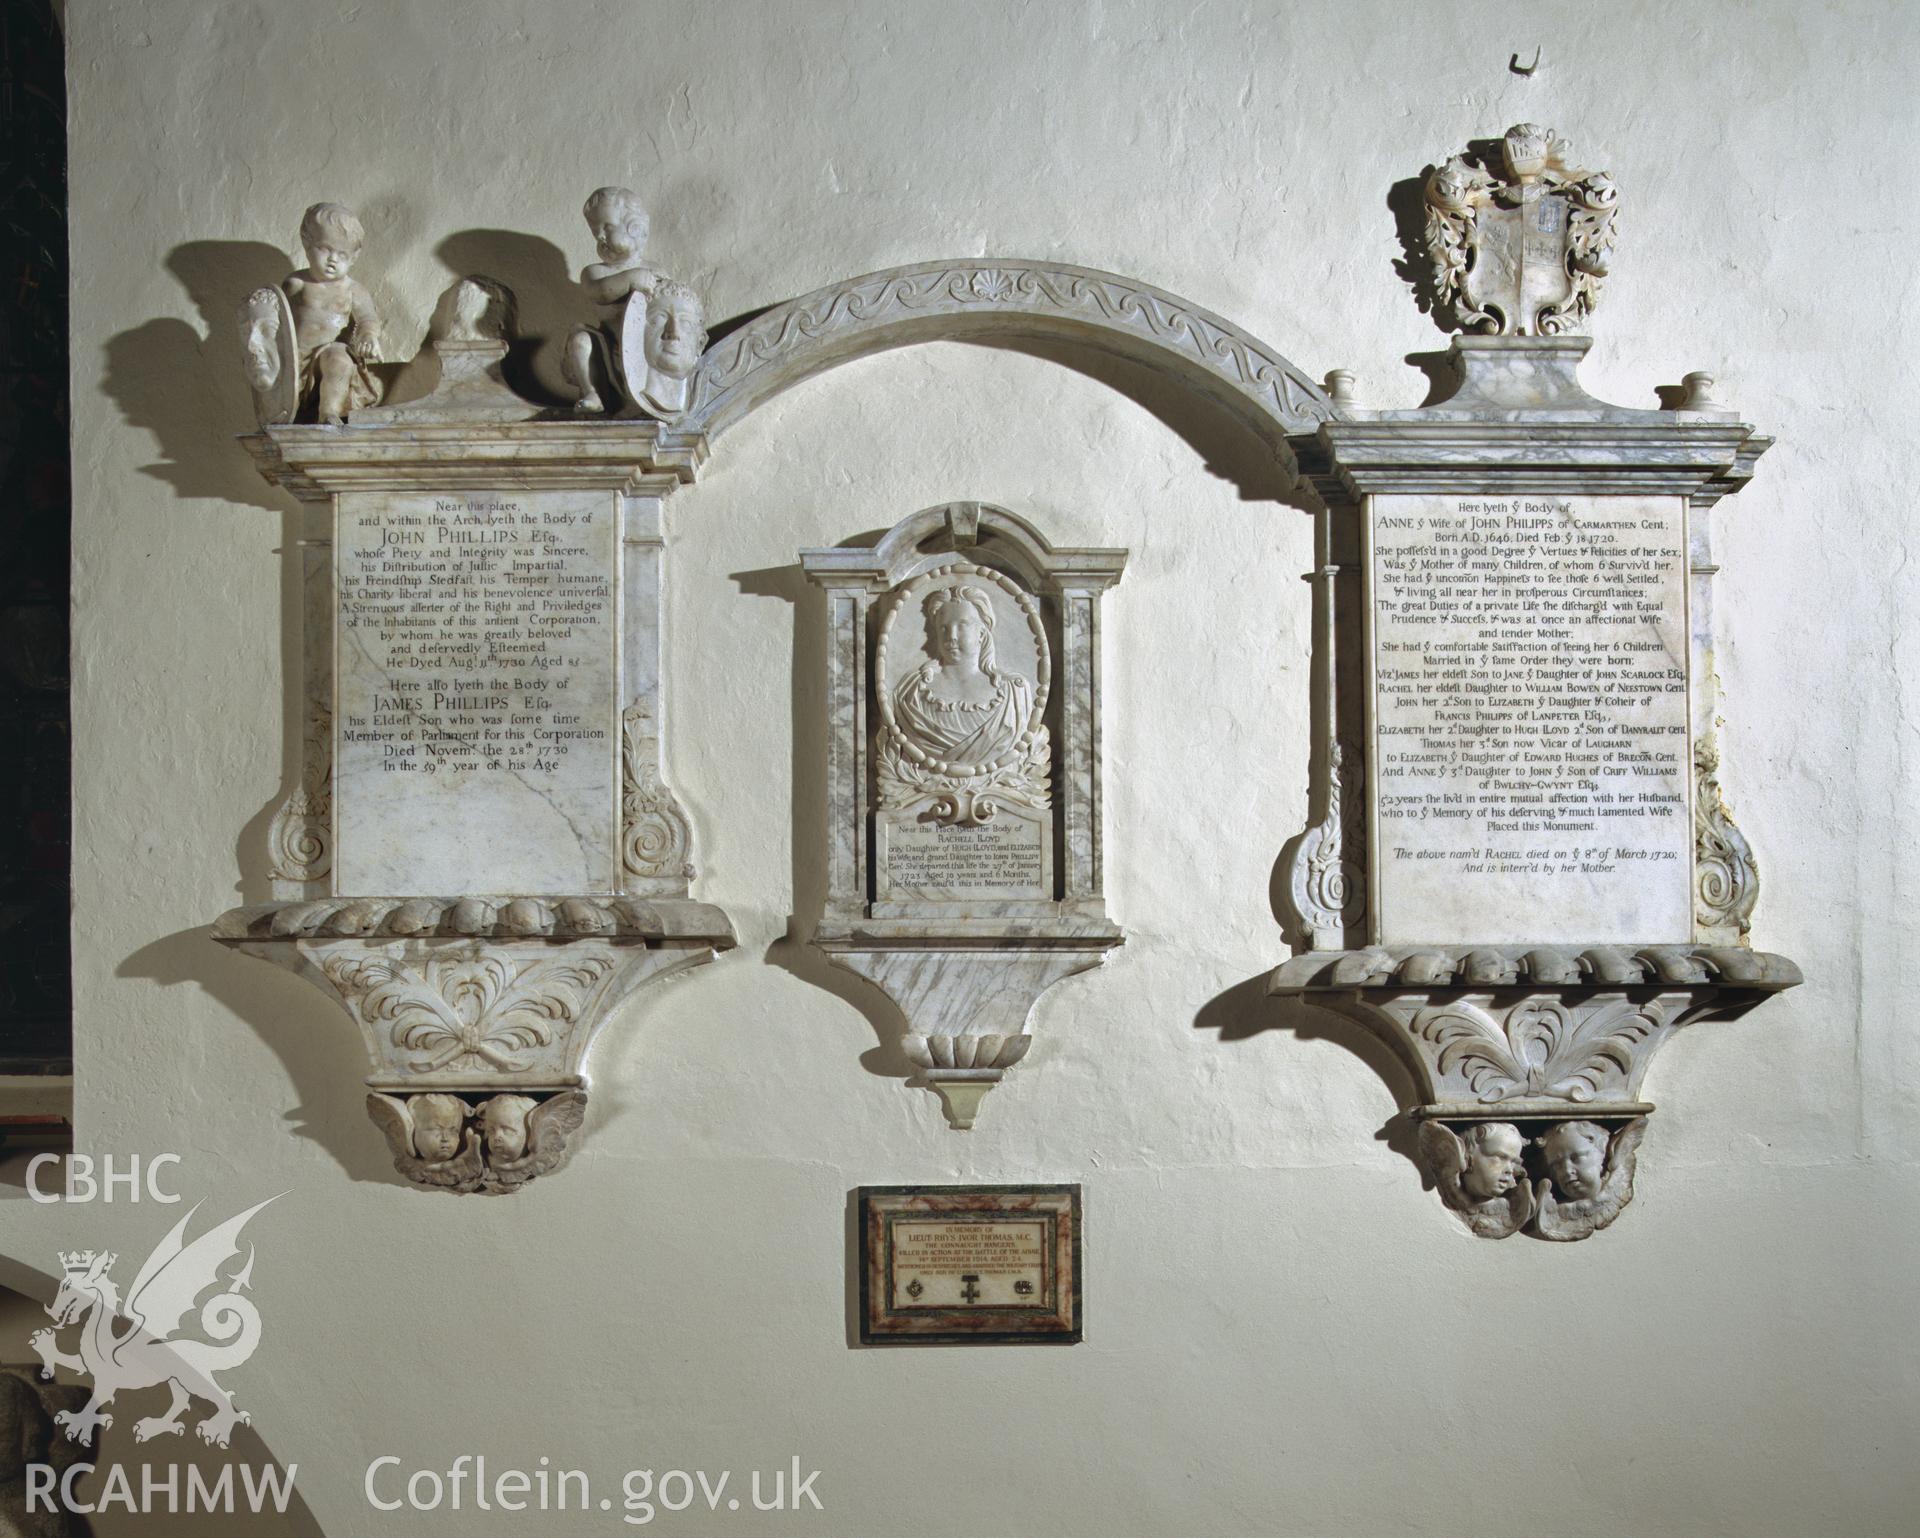 Colour transparency showing memorial to John and Ann Philips, situated in Carmarthen Church, produced by Iain Wright, June 2004.